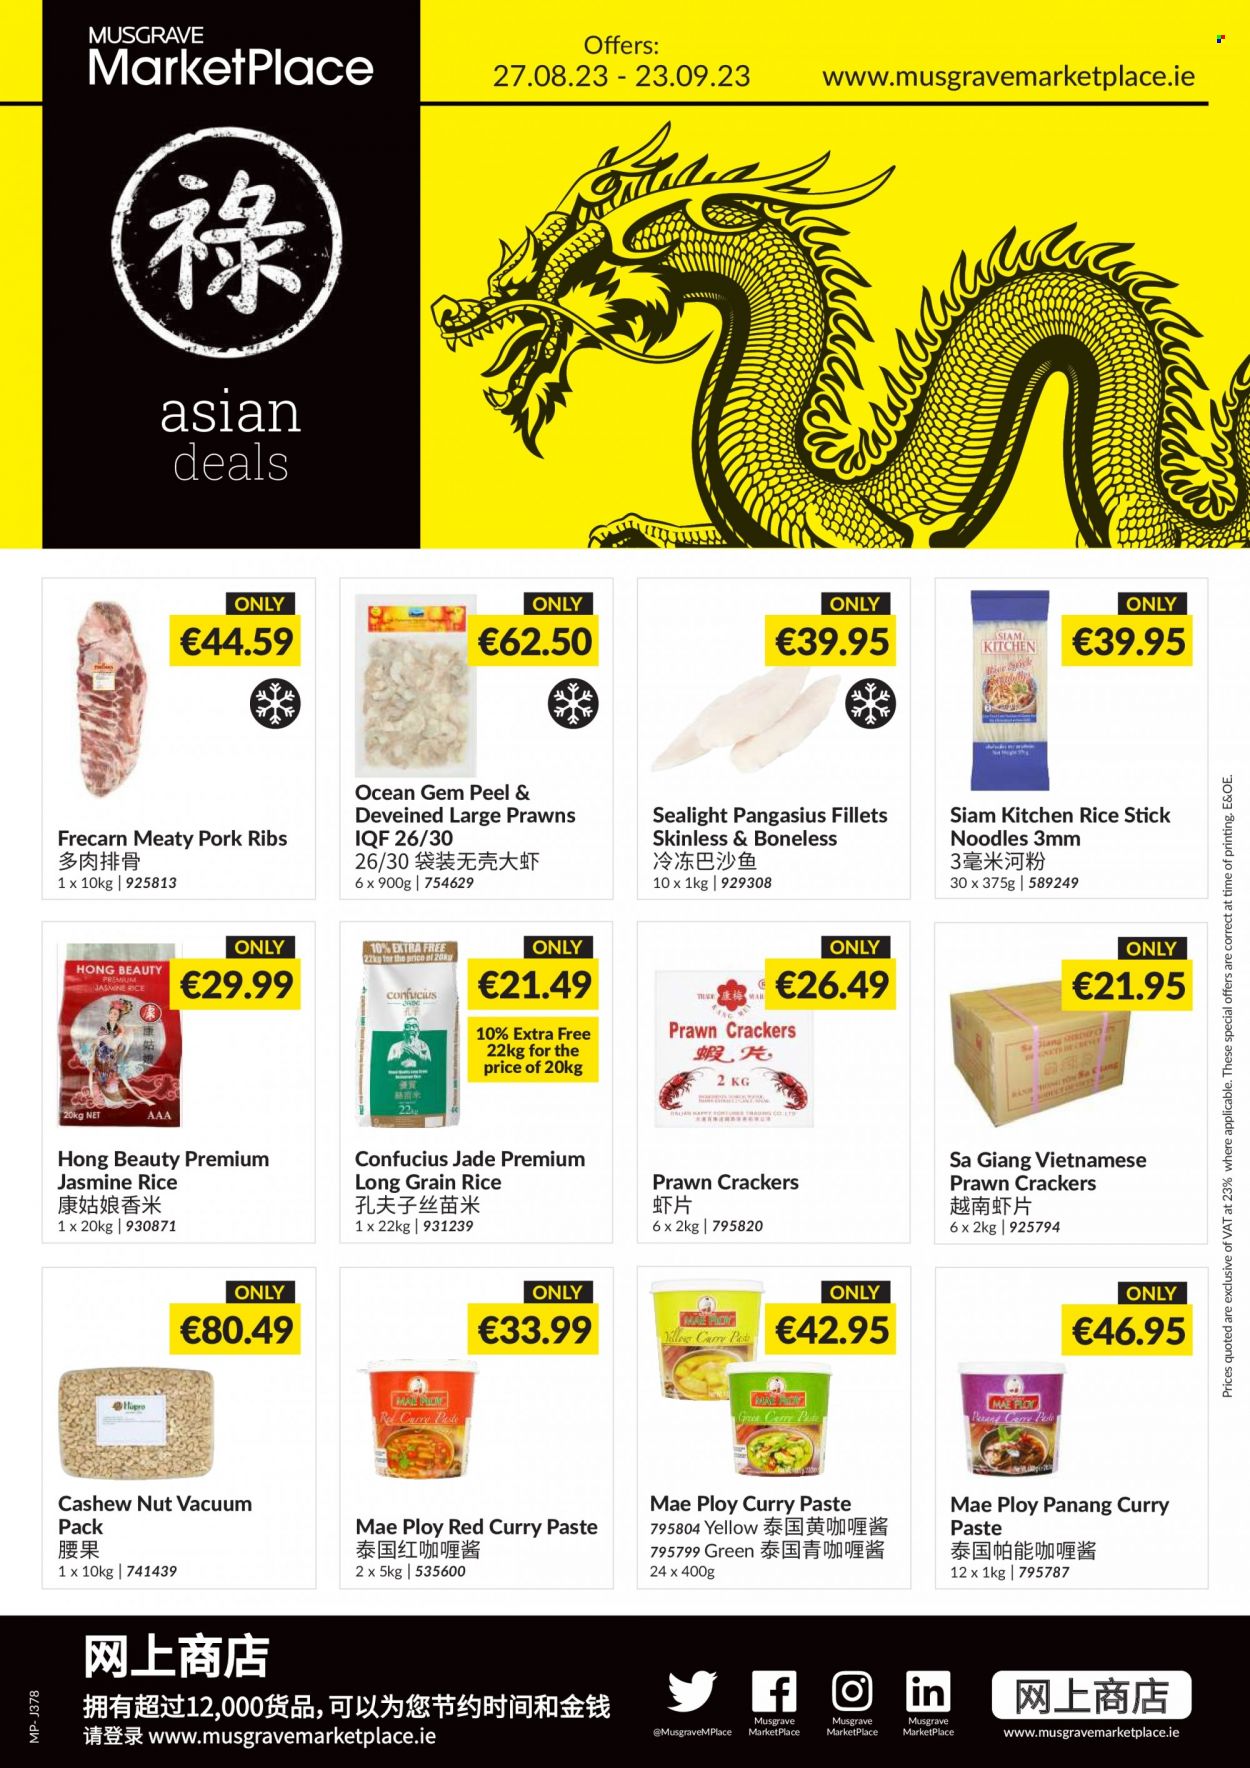 MUSGRAVE Market Place offer  - 27.08.2023 - 23.09.2023 - Sales products - pangasius, prawns, noodles, red curry, crackers, jasmine rice, long grain rice, curry paste, ribs, pork meat, pork ribs, pin. Page 1.